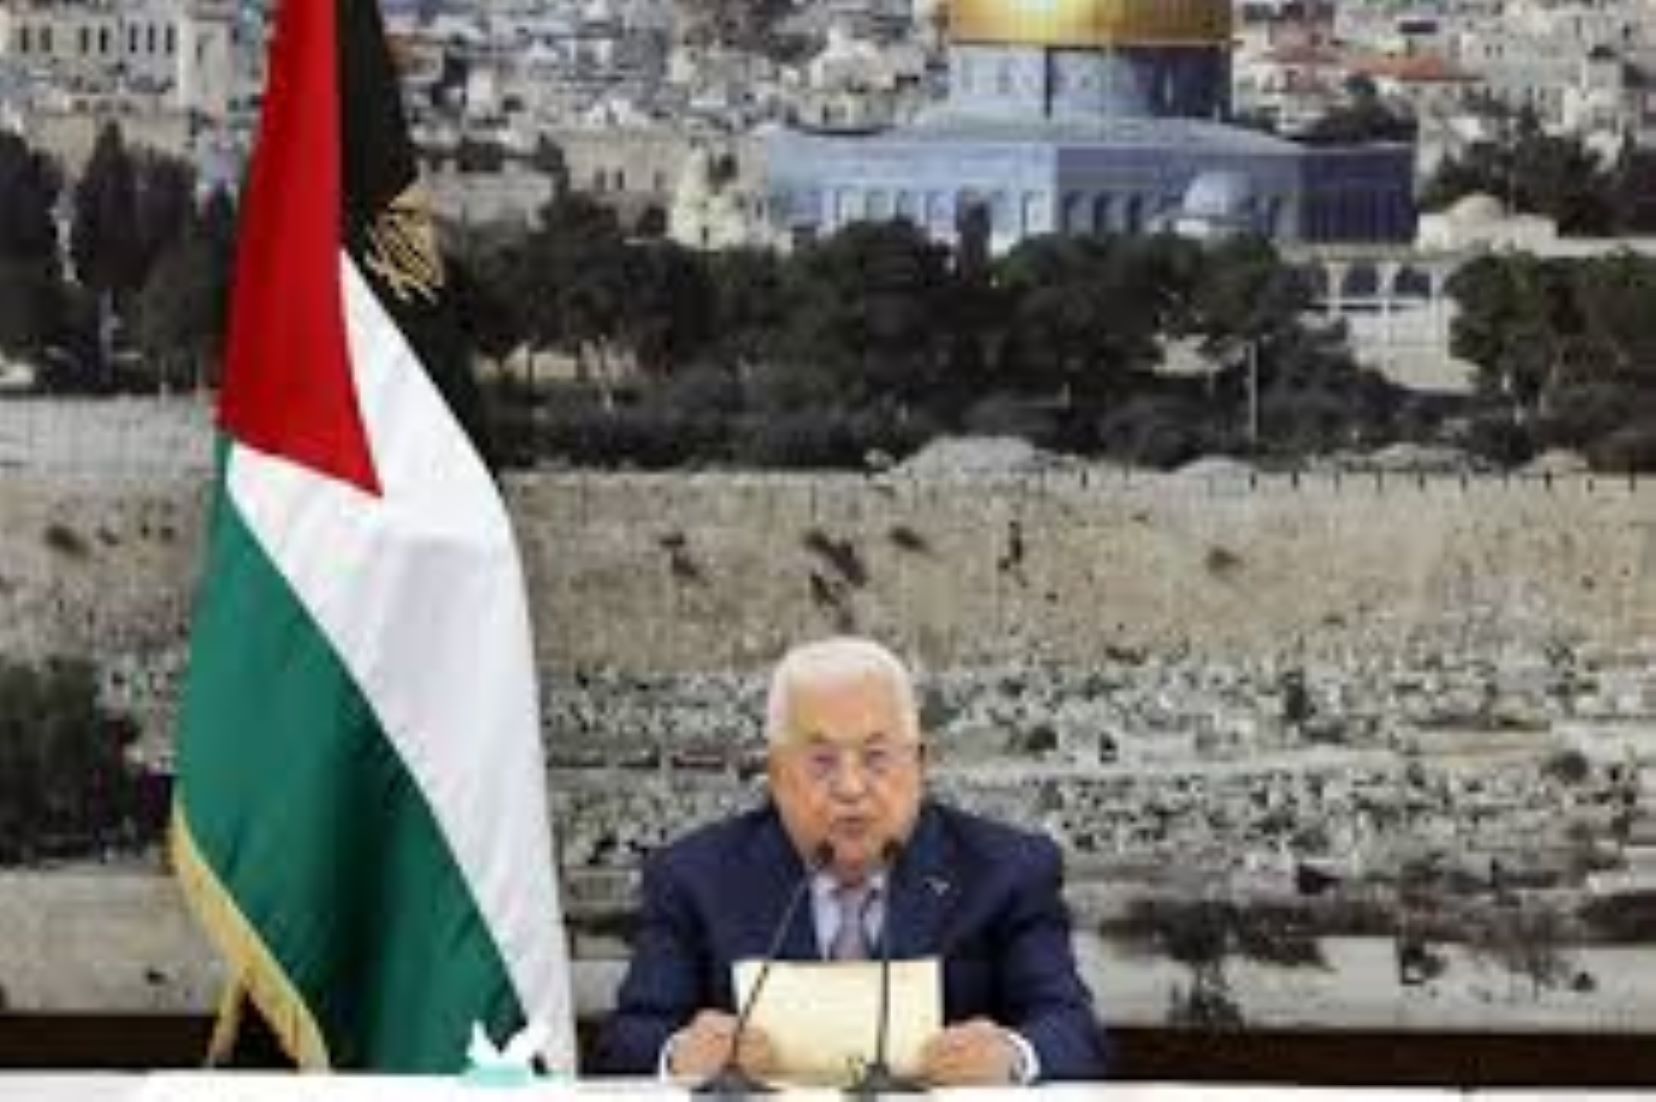 Palestinian Authority To “Reconsider” Relations With U.S.: President